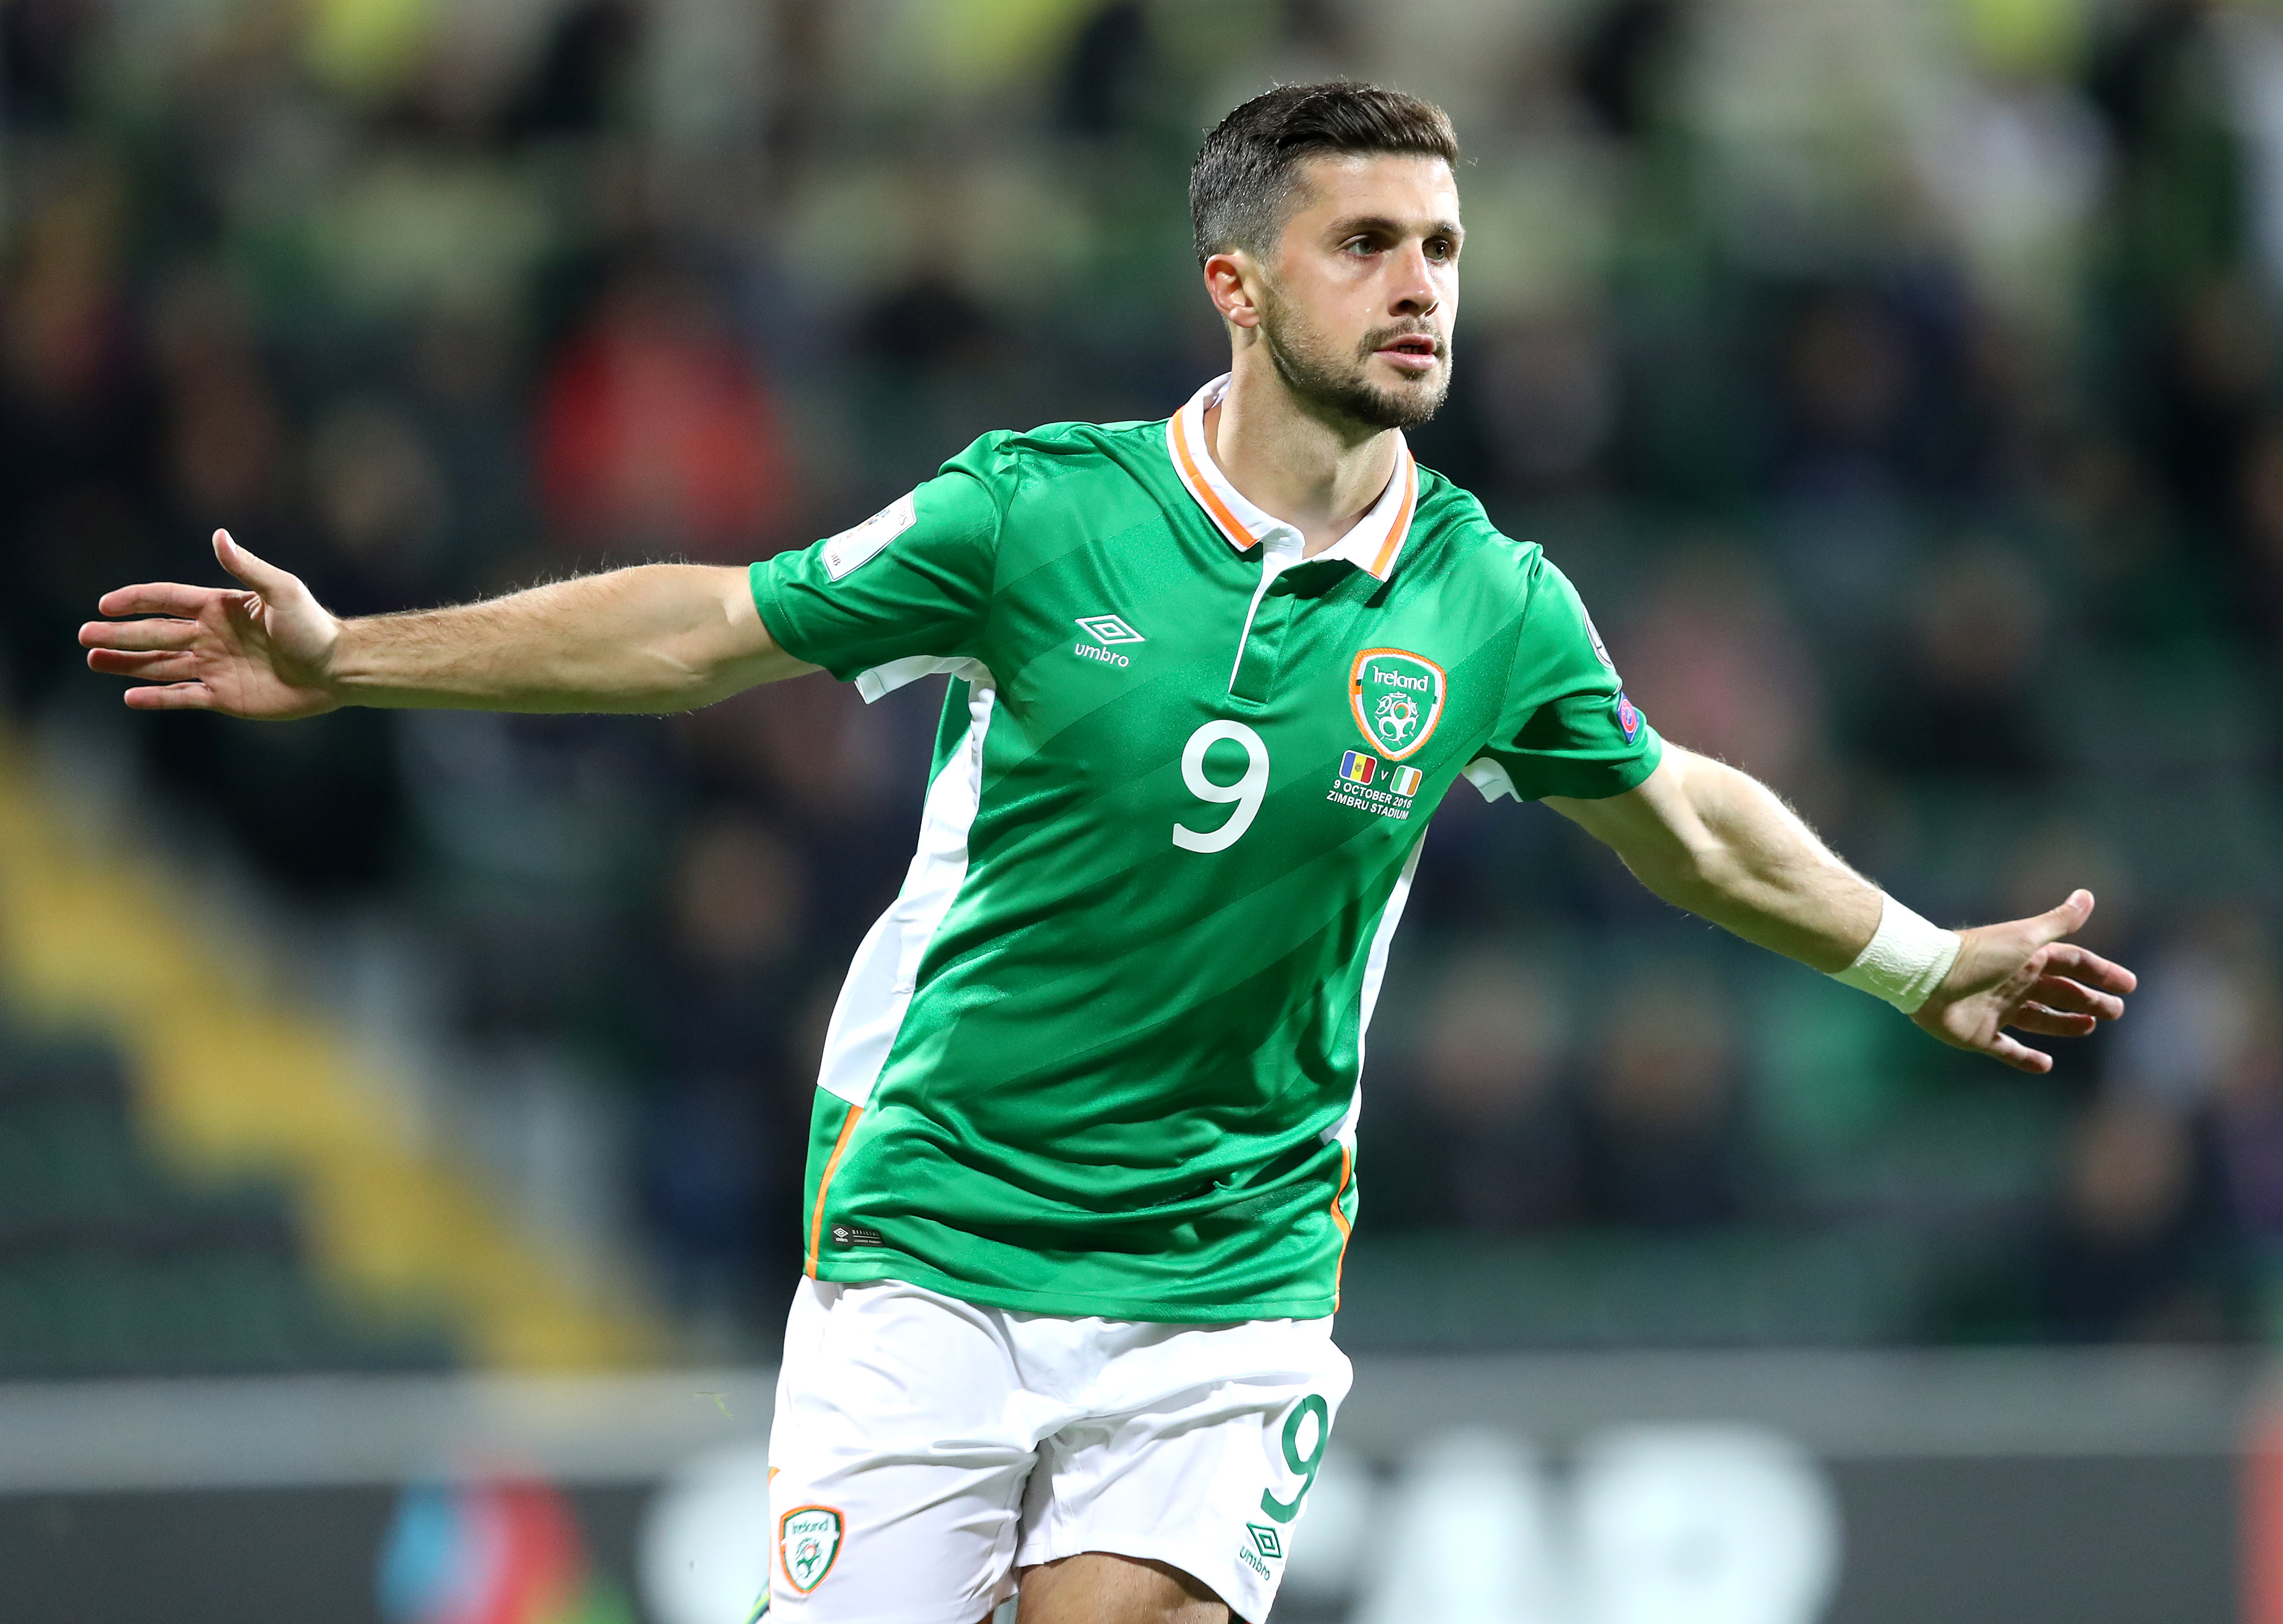 Shane Long celebrates scoring the first goal of the game 9/10/2016